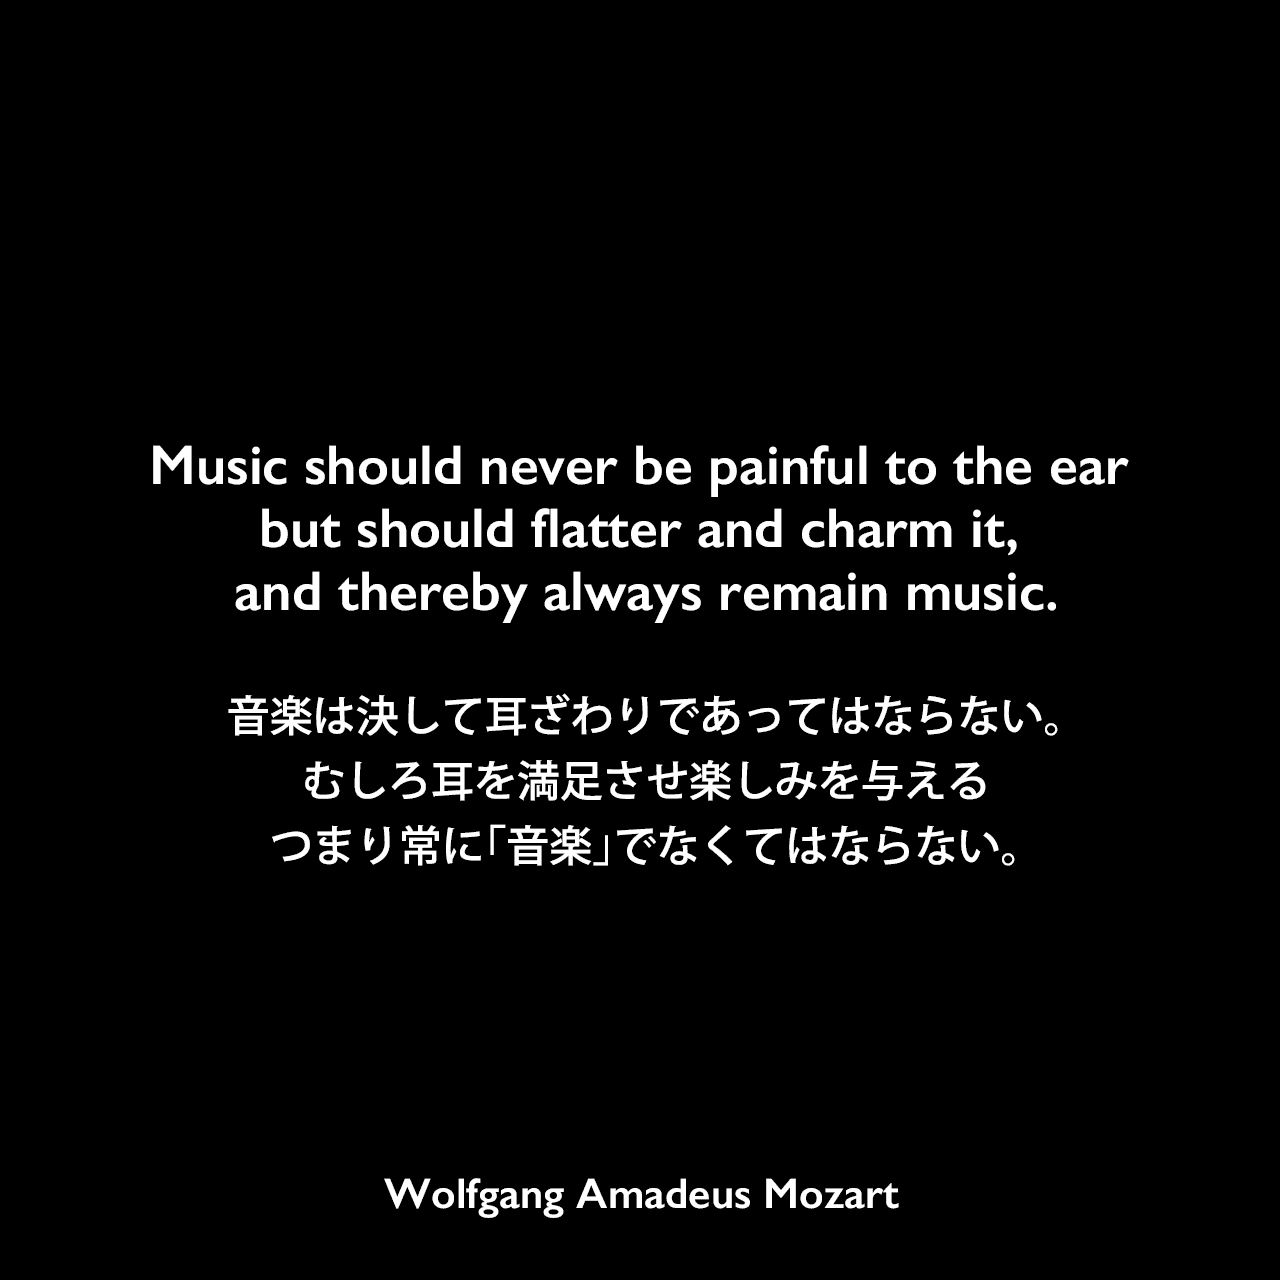 Music should never be painful to the ear but should flatter and charm it, and thereby always remain music.音楽は決して耳ざわりであってはならない。むしろ耳を満足させ楽しみを与える、つまり常に「音楽」でなくてはならない。- モーツァルトの手紙よりWolfgang Amadeus Mozart